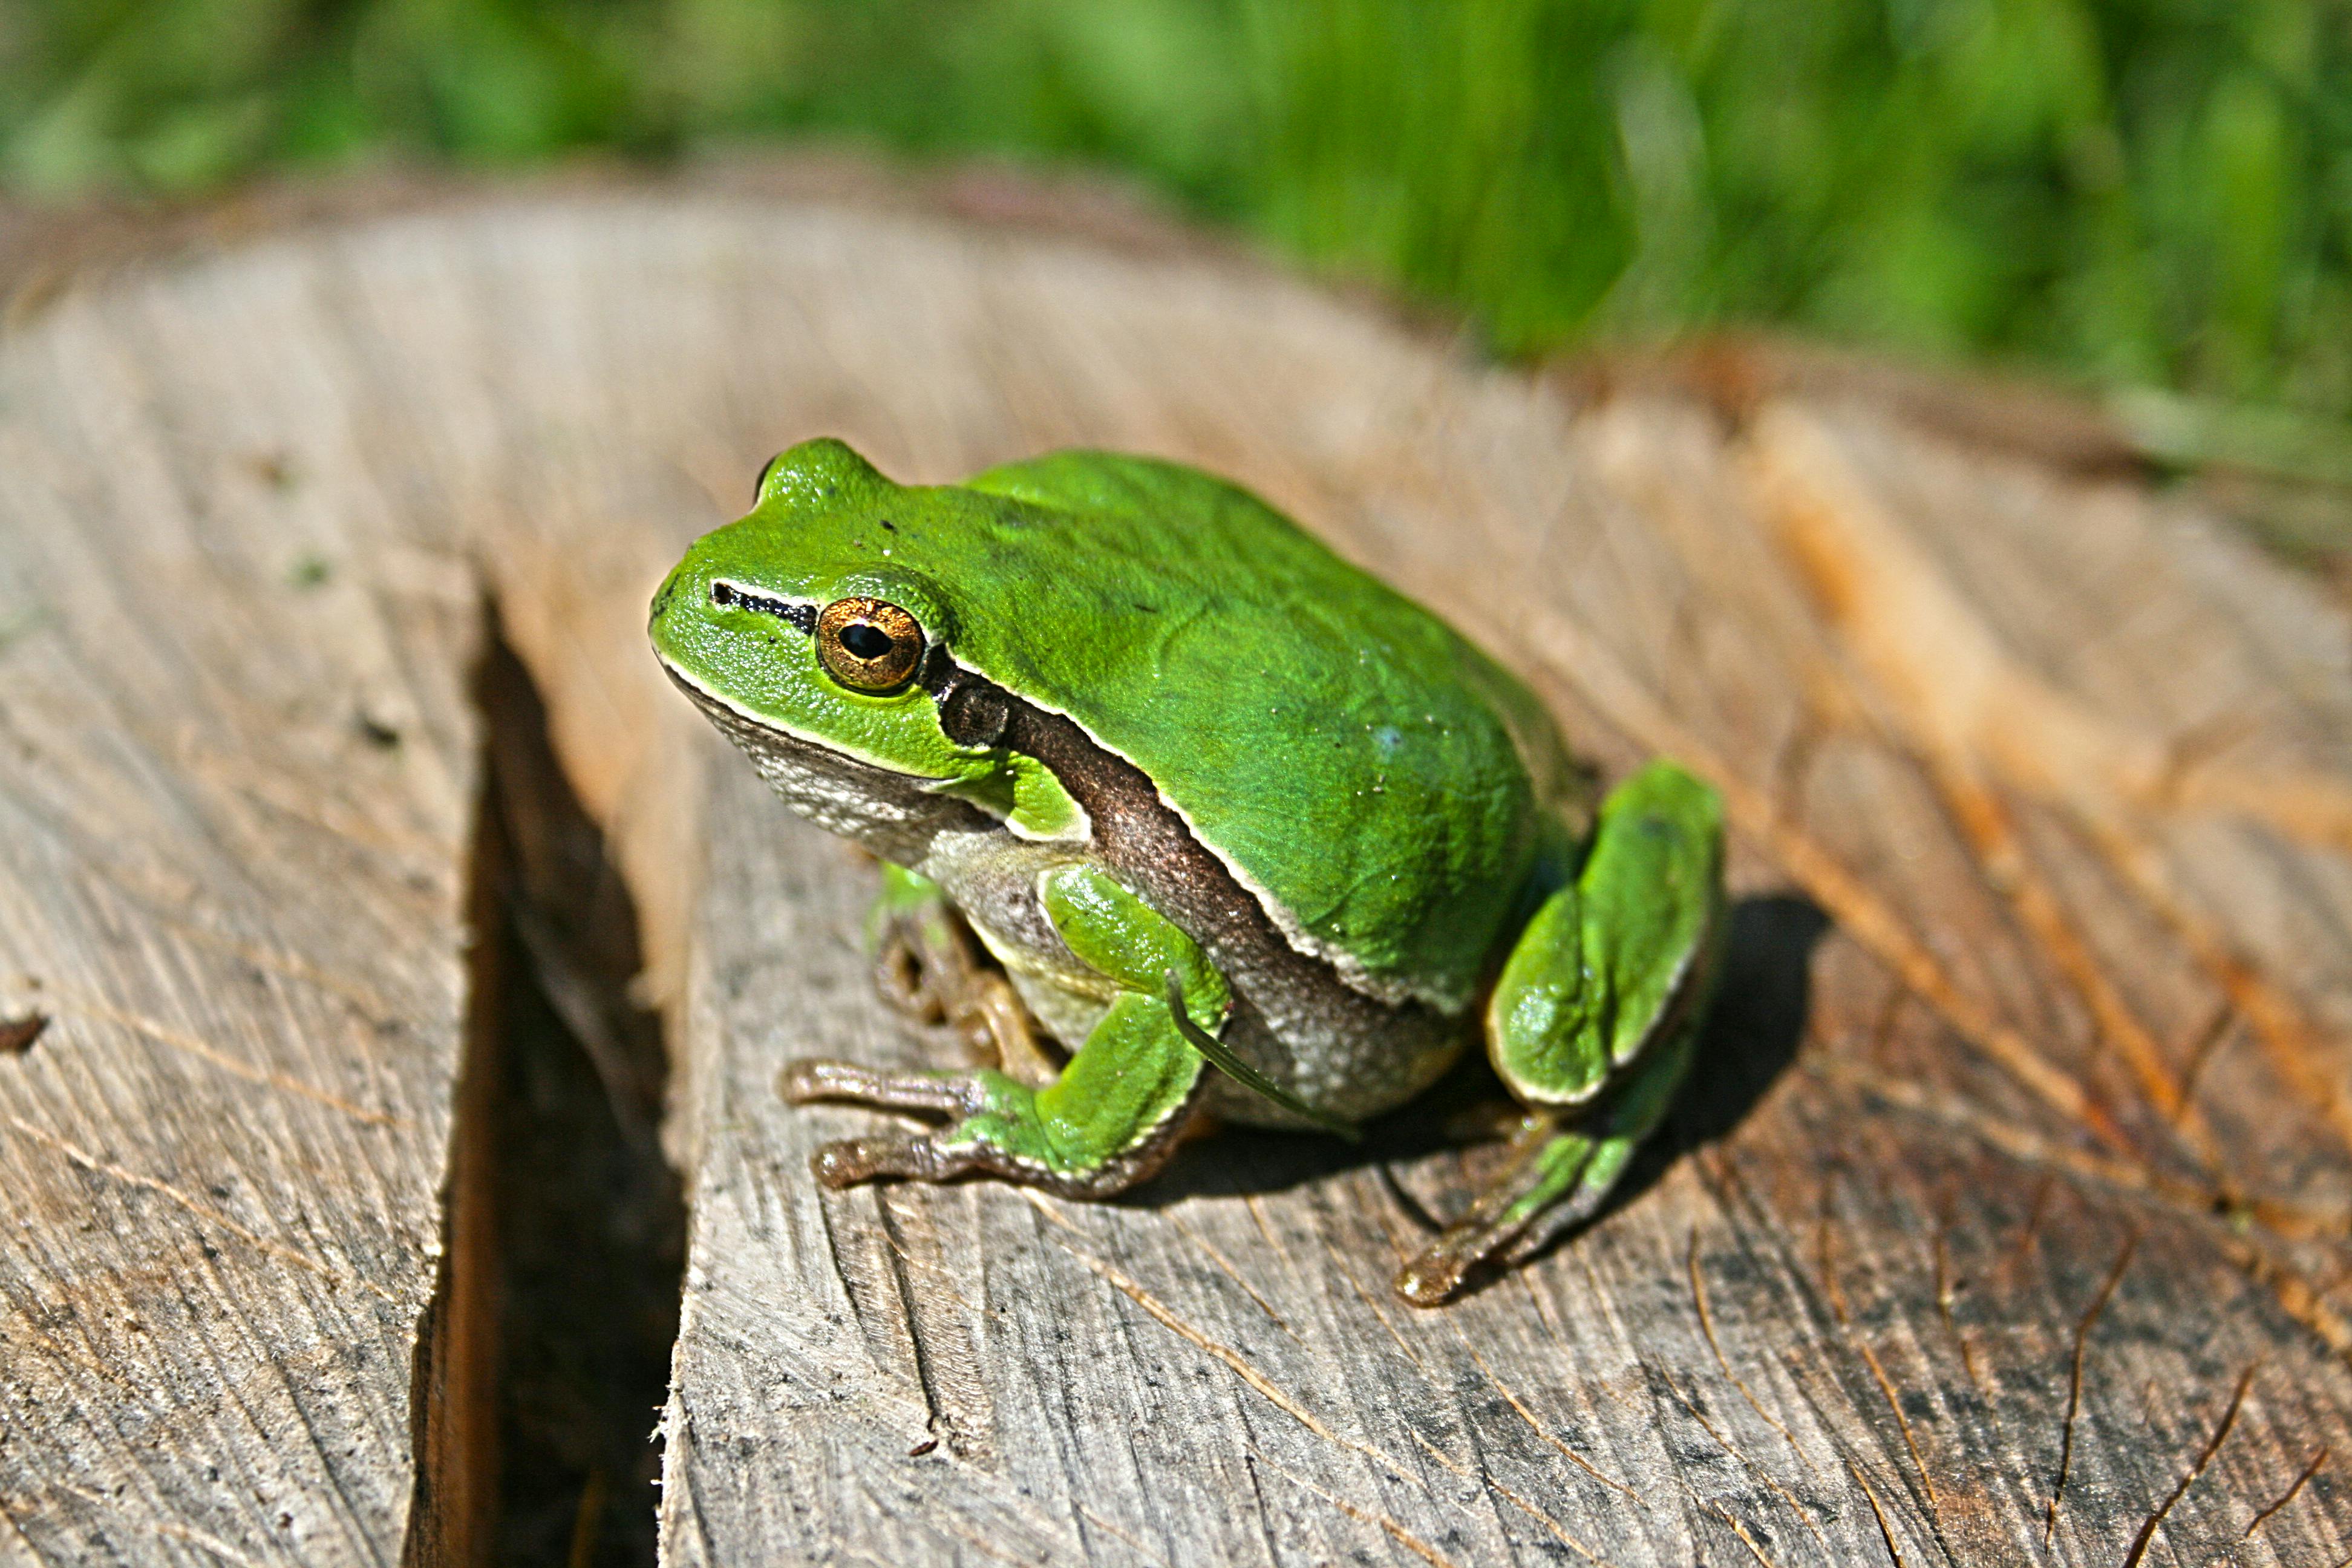 63 Sharp Frog Pictures · Pexels · Free Stock Photos